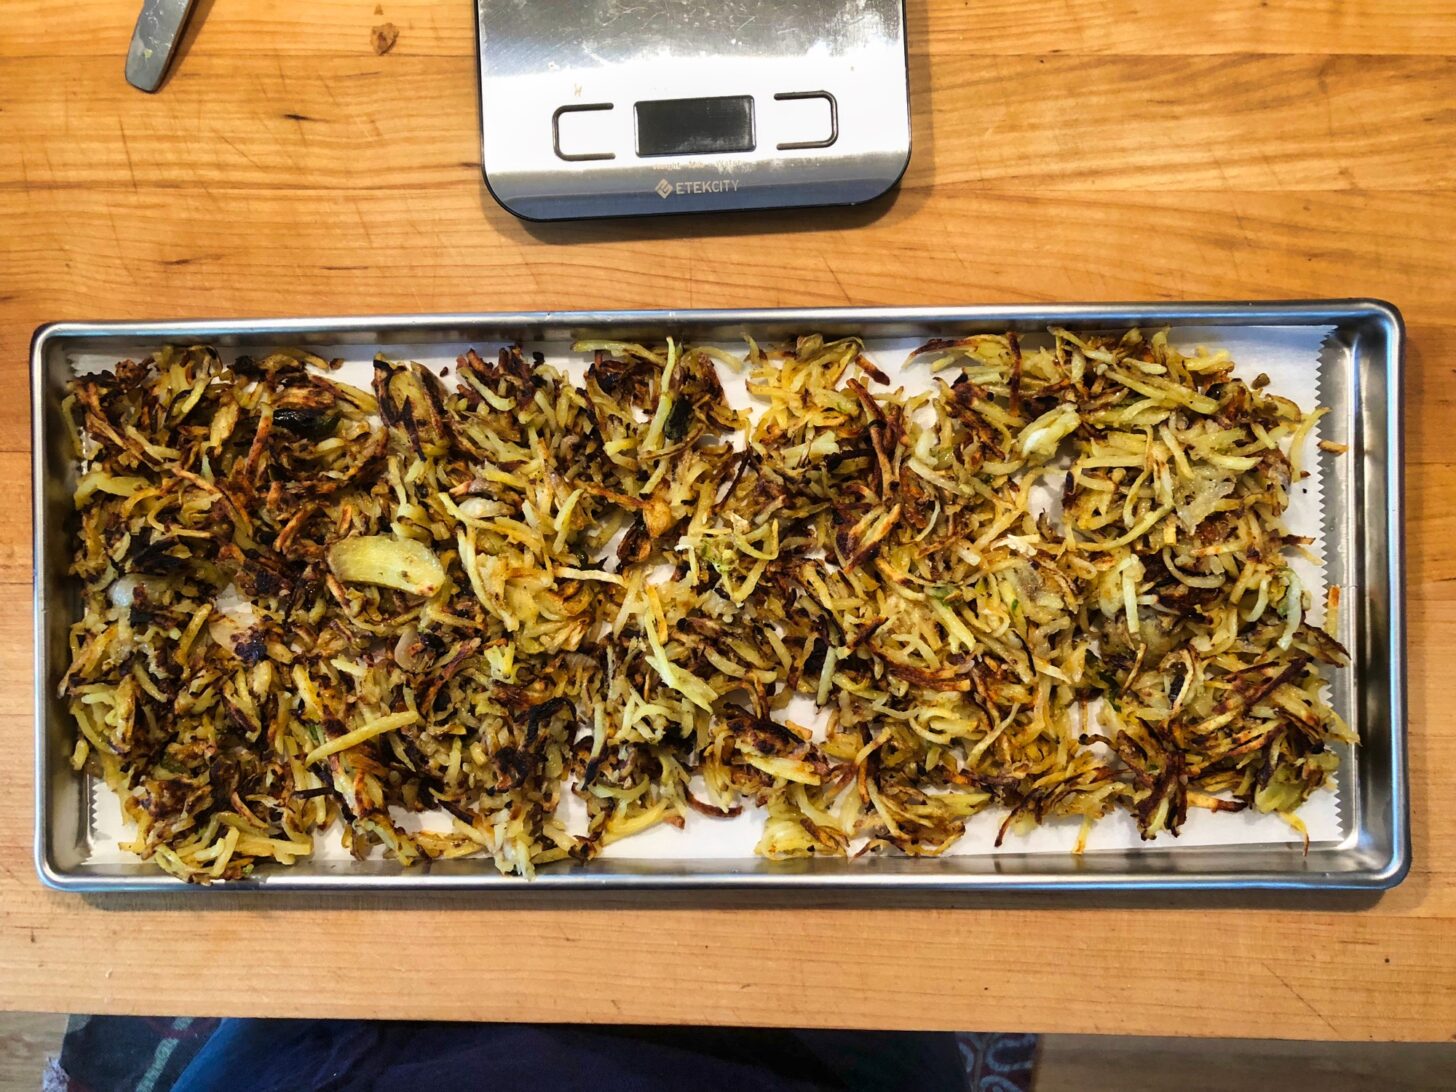 a tray of hashbrowns ready for the freeze dryer